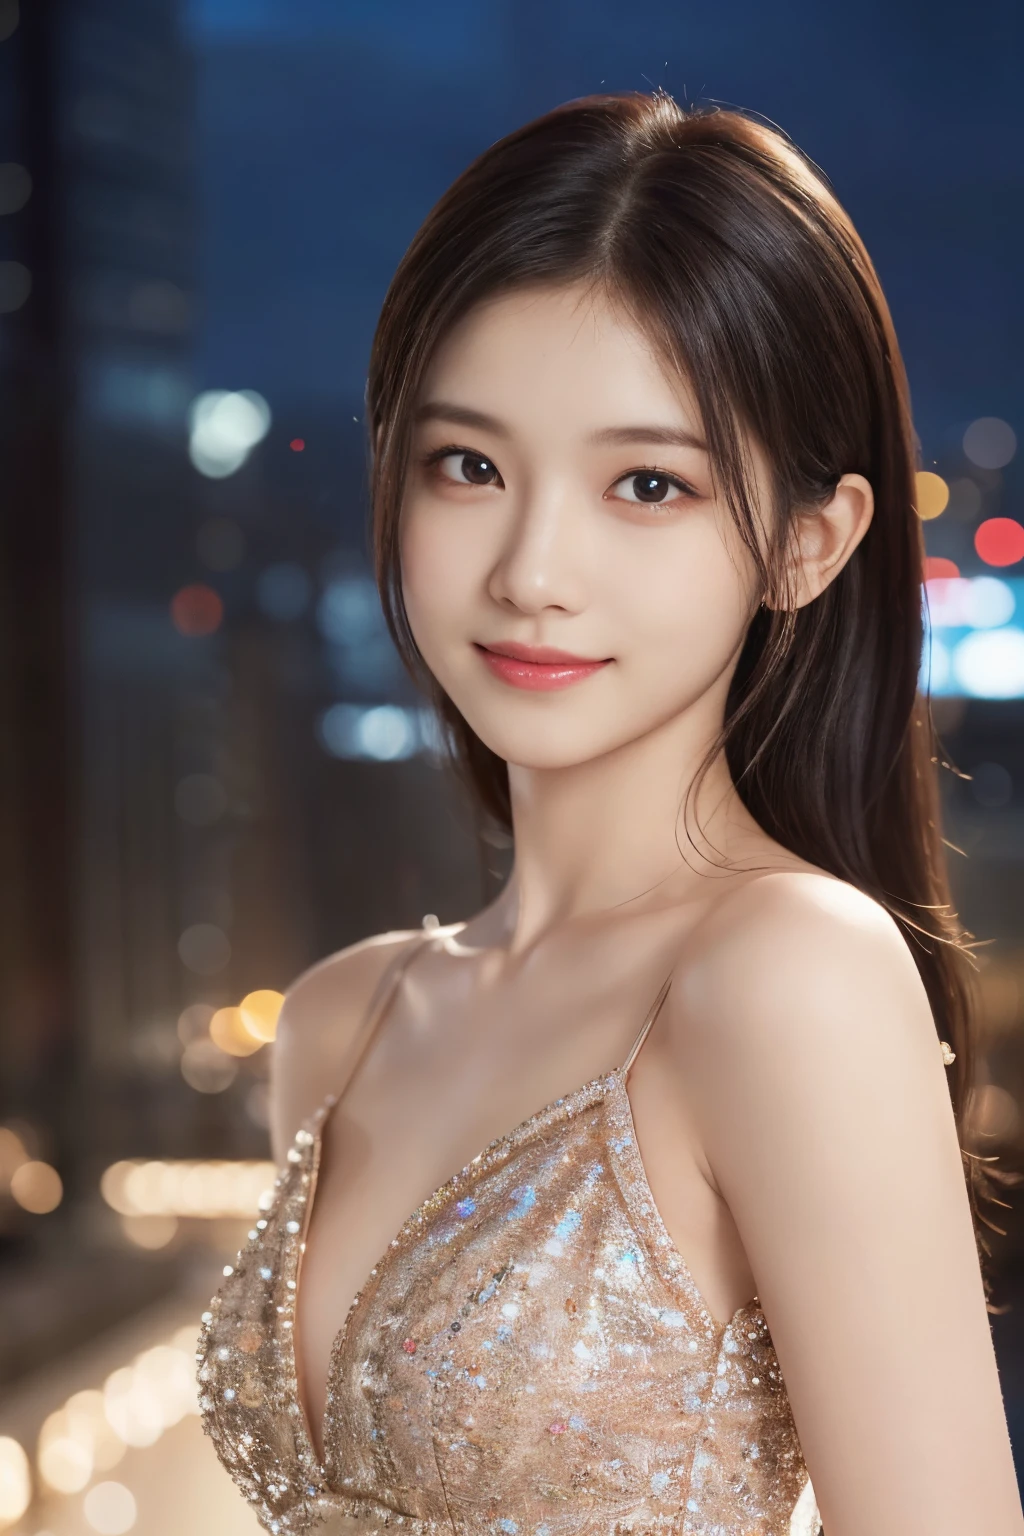 1girl in, (Wearing a sparkly dress:1.3), (Raw photo, Best Quality), (Realistic, Photorealsitic:1.4), masutepiece, Extremely delicate and beautiful, Extremely detailed, 2k wallpaper, amazing, finely detail, the Extremely Detailed CG Unity 8K Wallpapers, Ultra-detailed, hight resolution, Soft light, Beautiful detailed girl, extremely detailed eye and face, beautiful detailed nose, Beautiful detailed eyes, Cinematic lighting, city light at night, Perfect Anatomy, Small, Slender body, Smiling